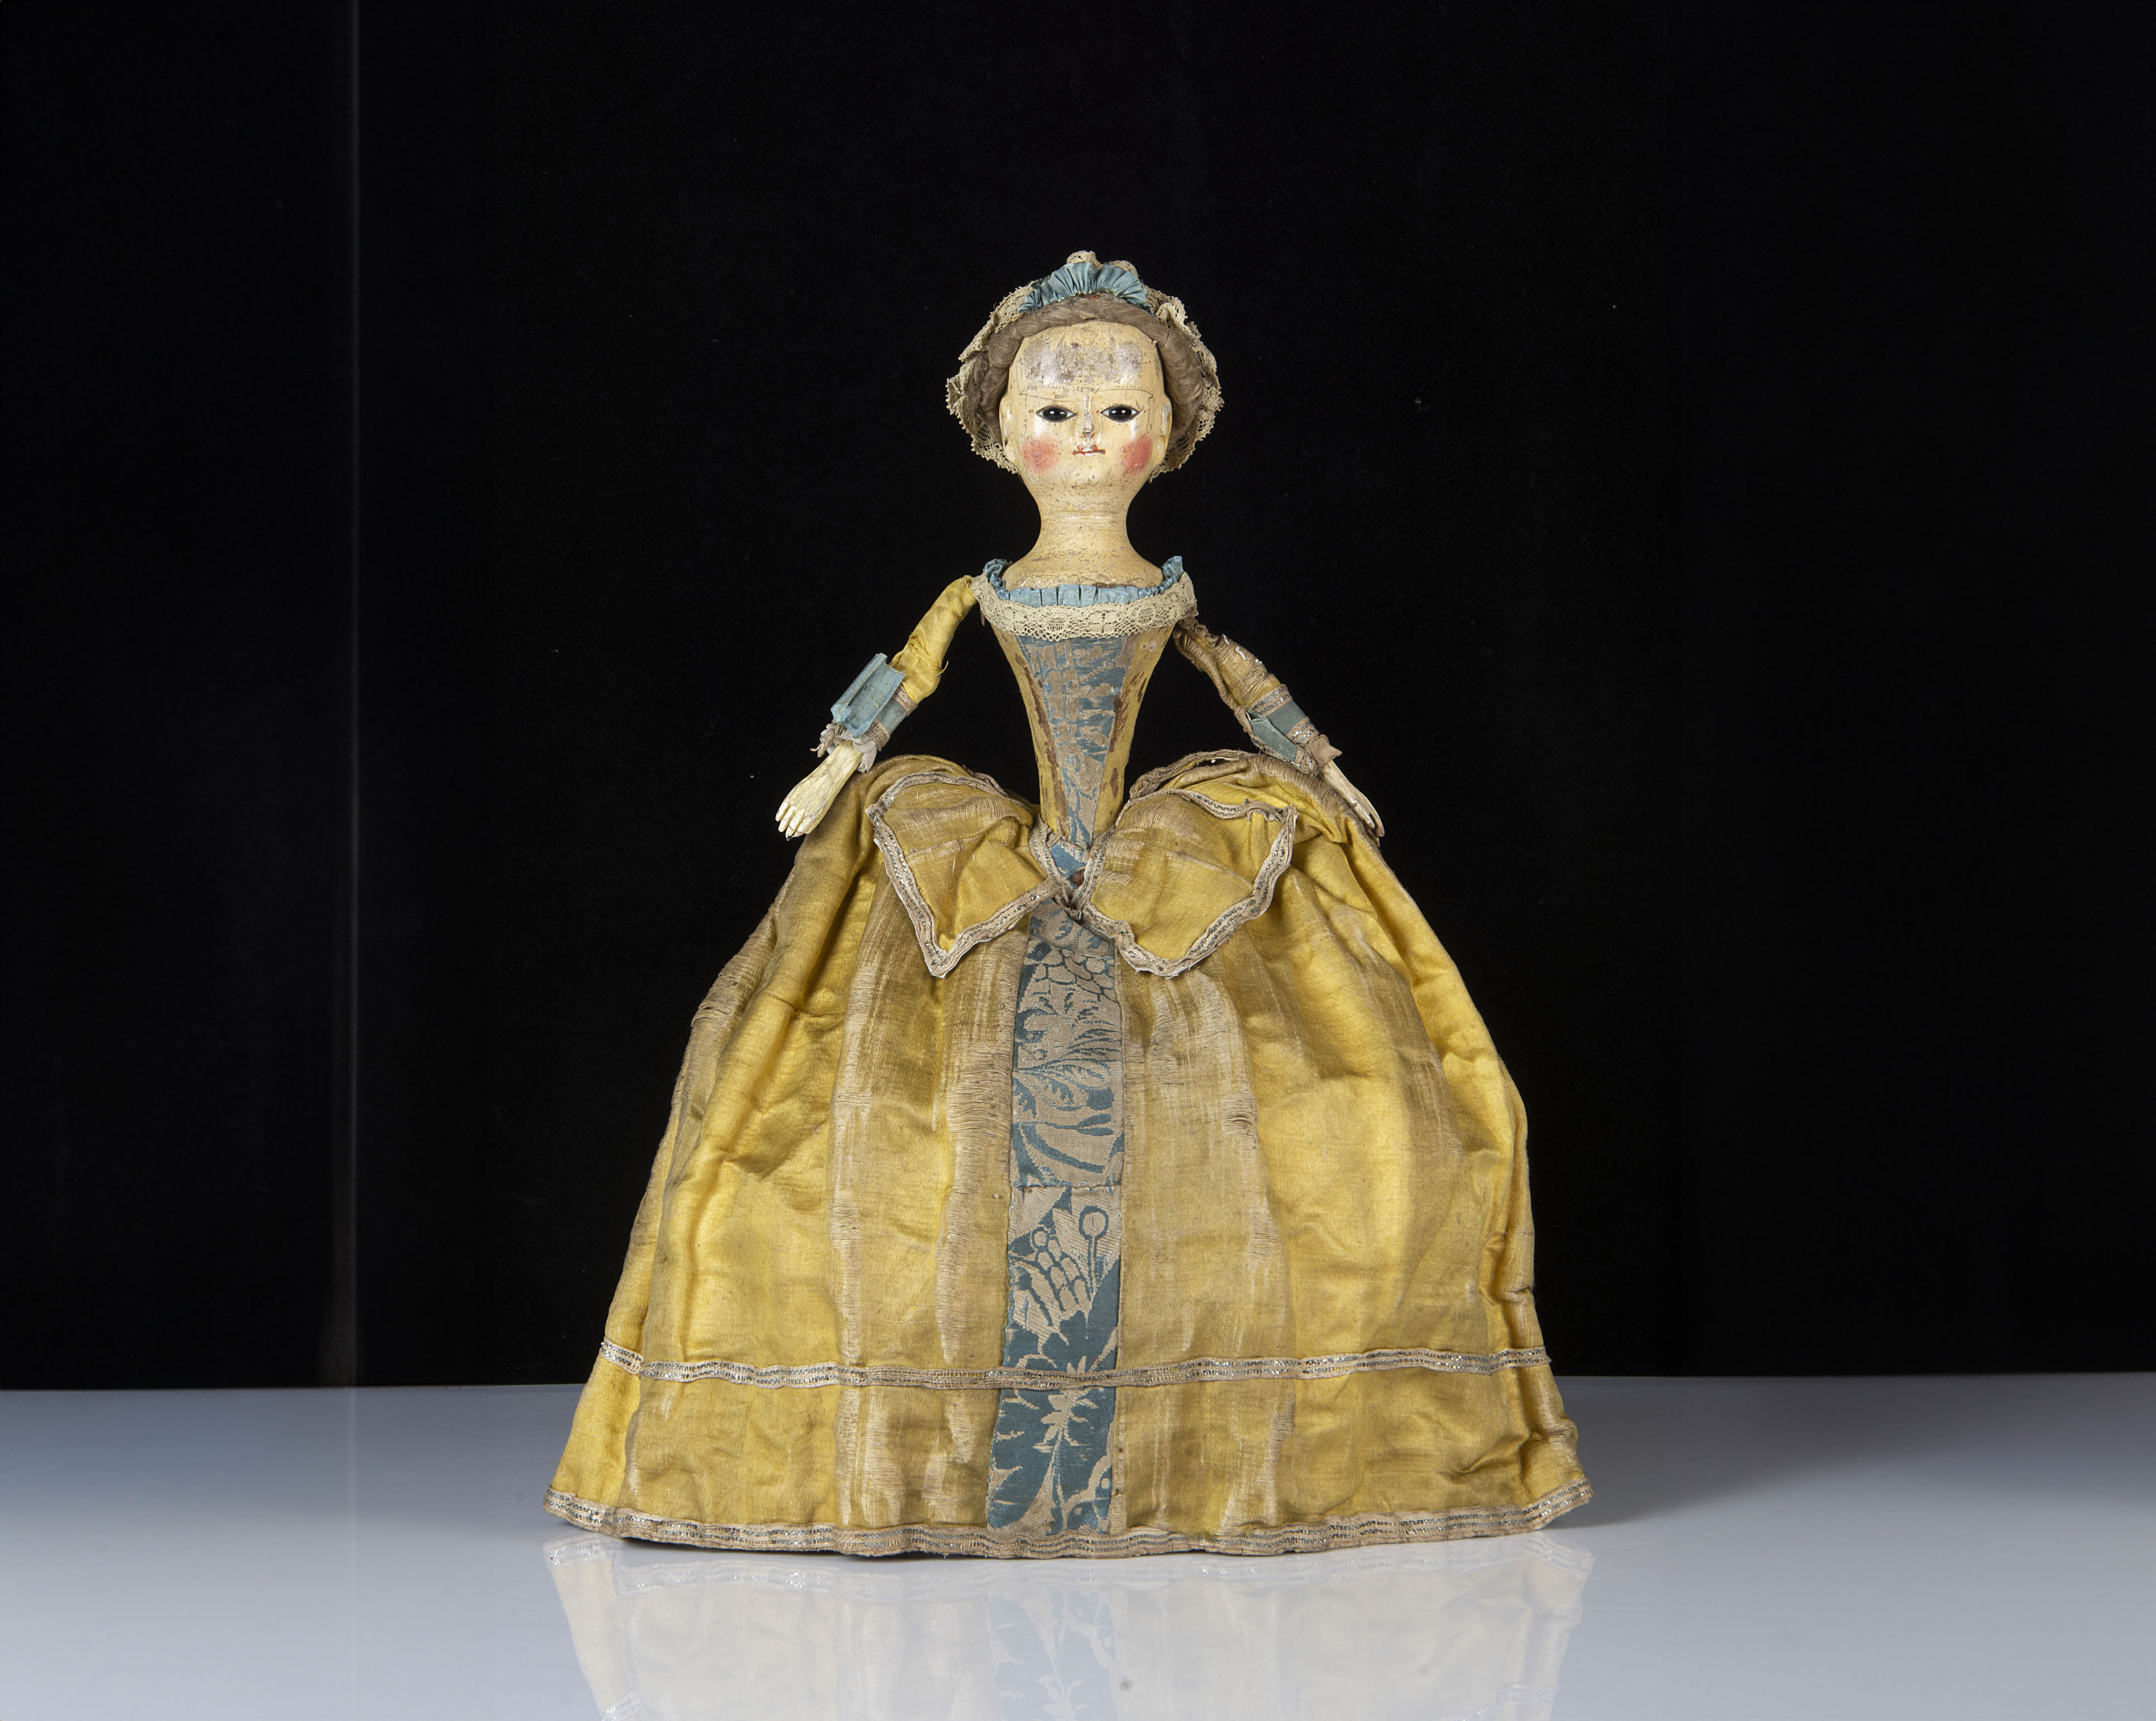 The Important Private Antique Doll Collection of Austin Smith and Margaret Harkin - Part 1